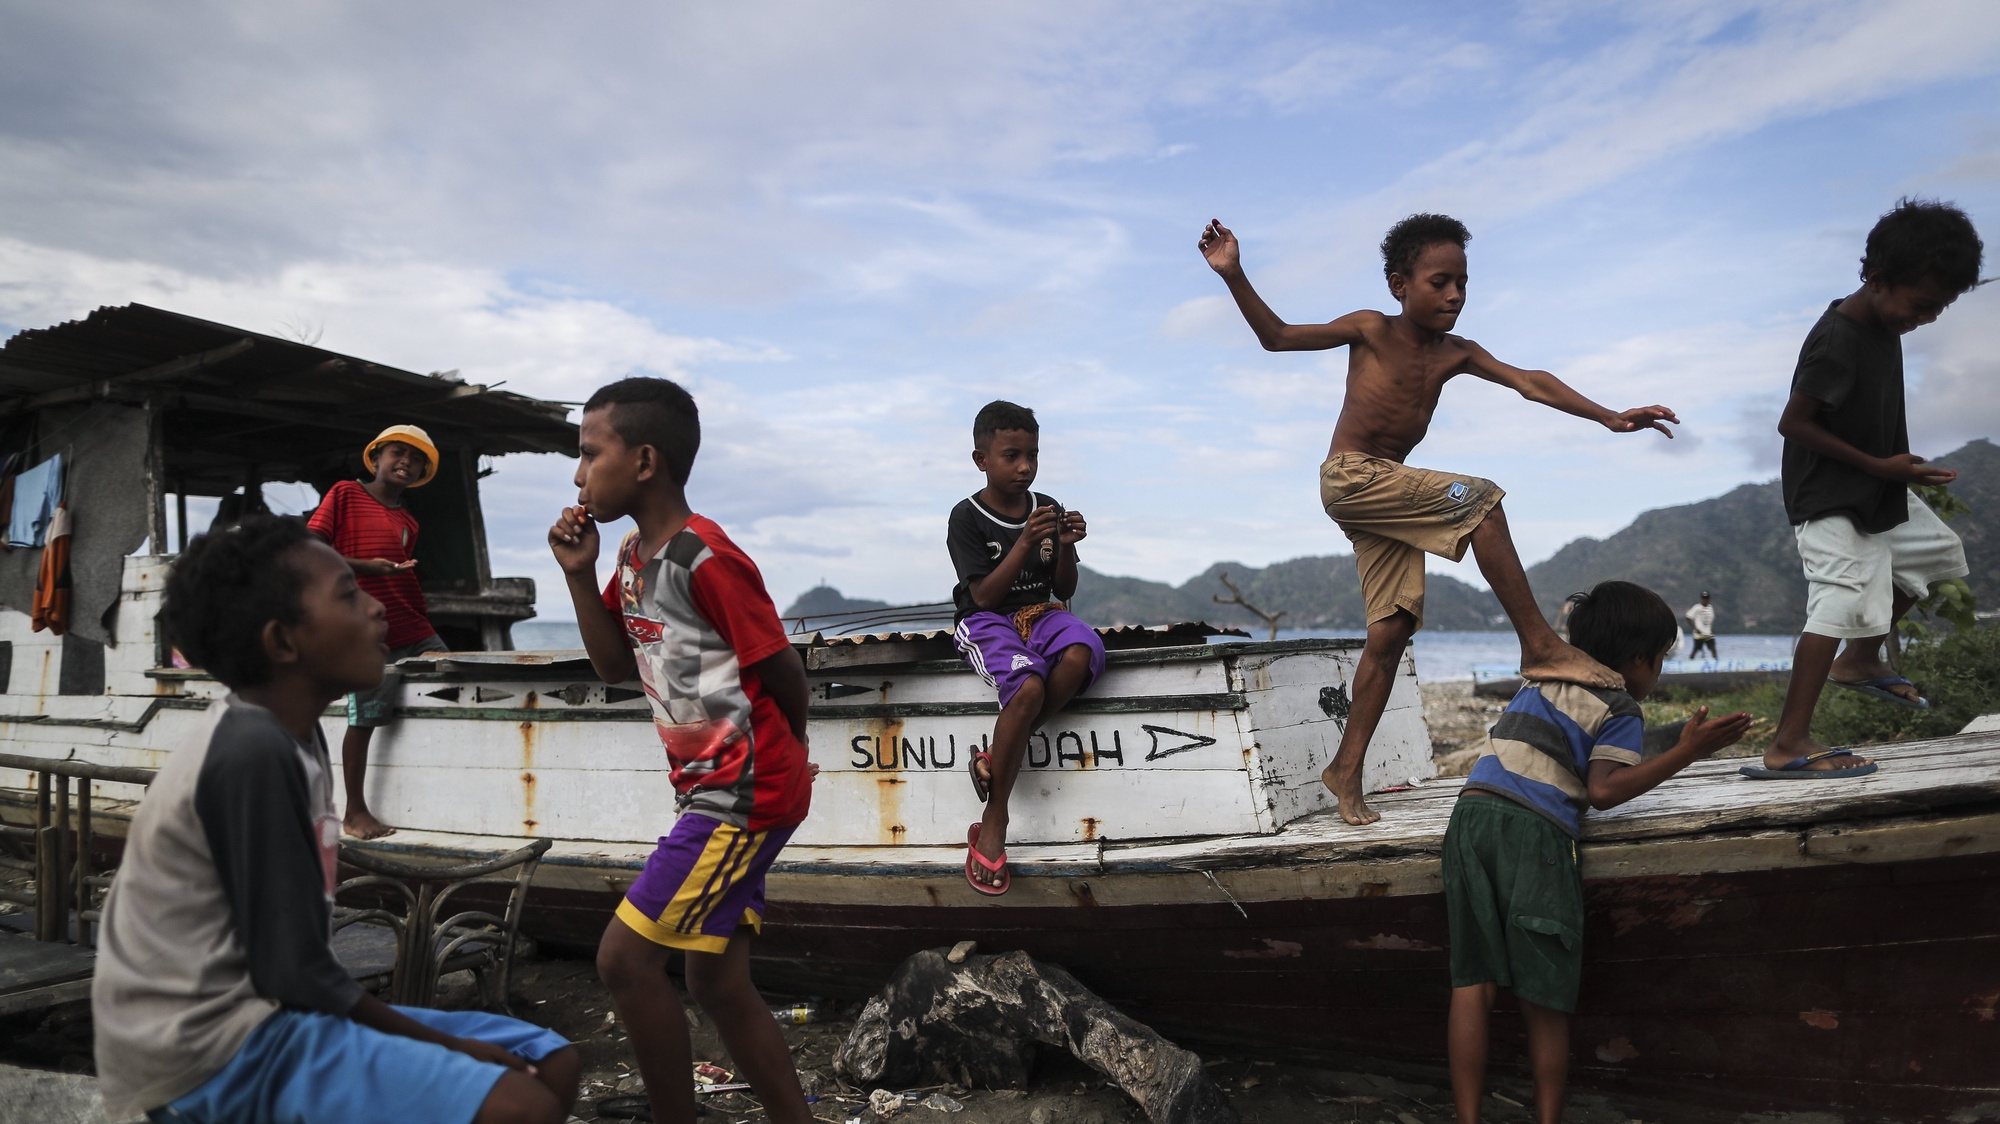 epa05857499 East Timorese young boys play on a broken boat at Bidau Lecidere beach in Dili, East Timor also known as Timor Leste, 19 March 2017. East Timor will hold the presidential election on 20 March 2017. The country gained their independence from Indonesia in 2002.  EPA/MAST IRHAM